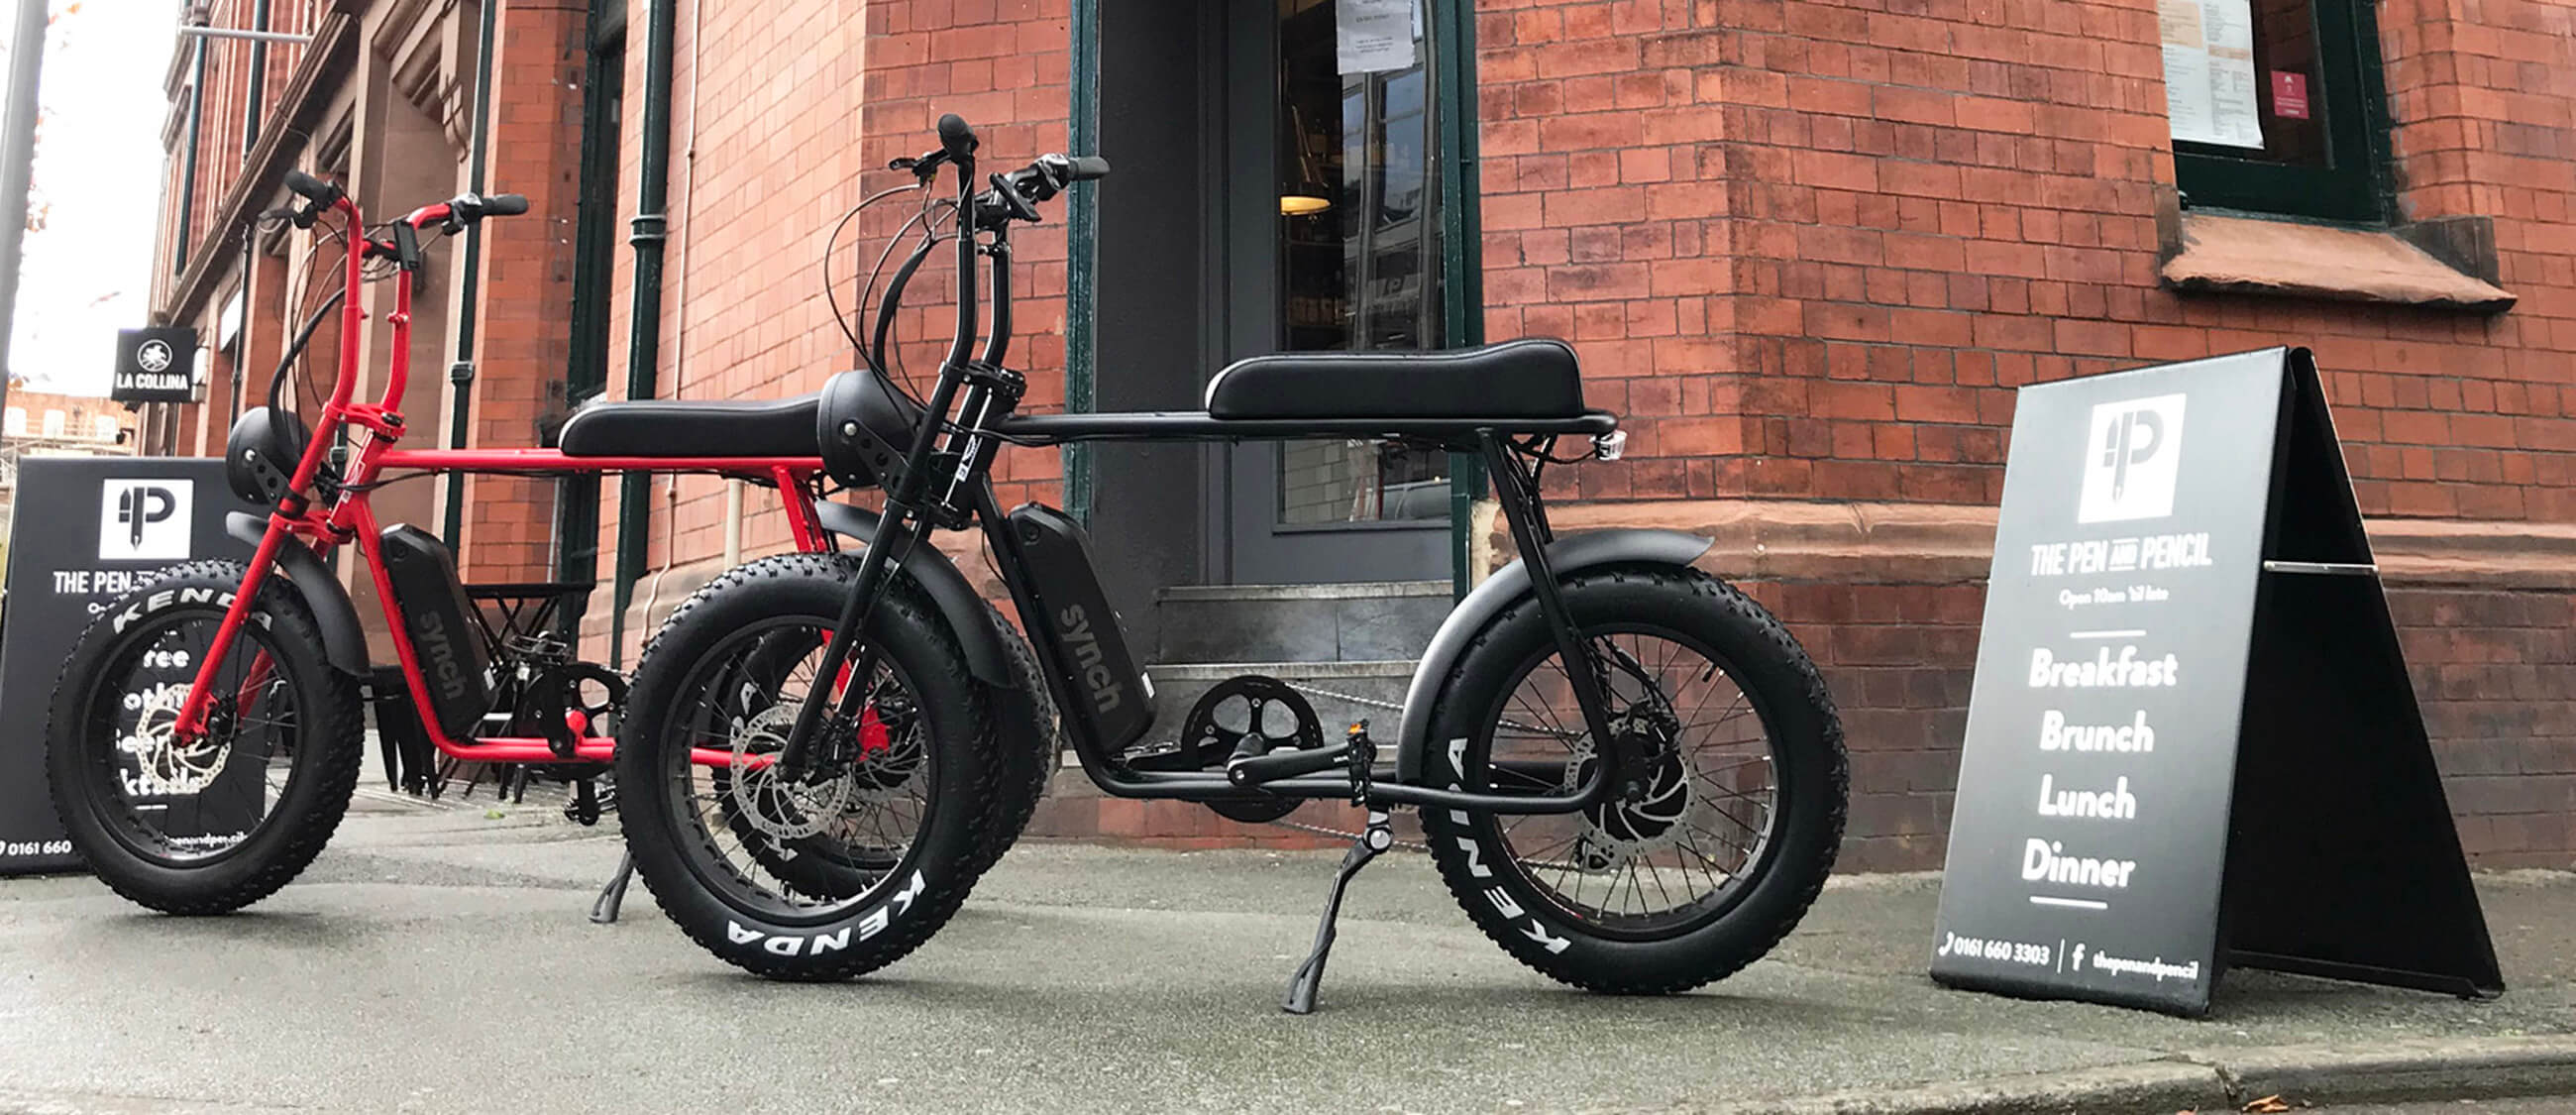 Super Cool Monkey Ebikes Outside The Pen and Pencil